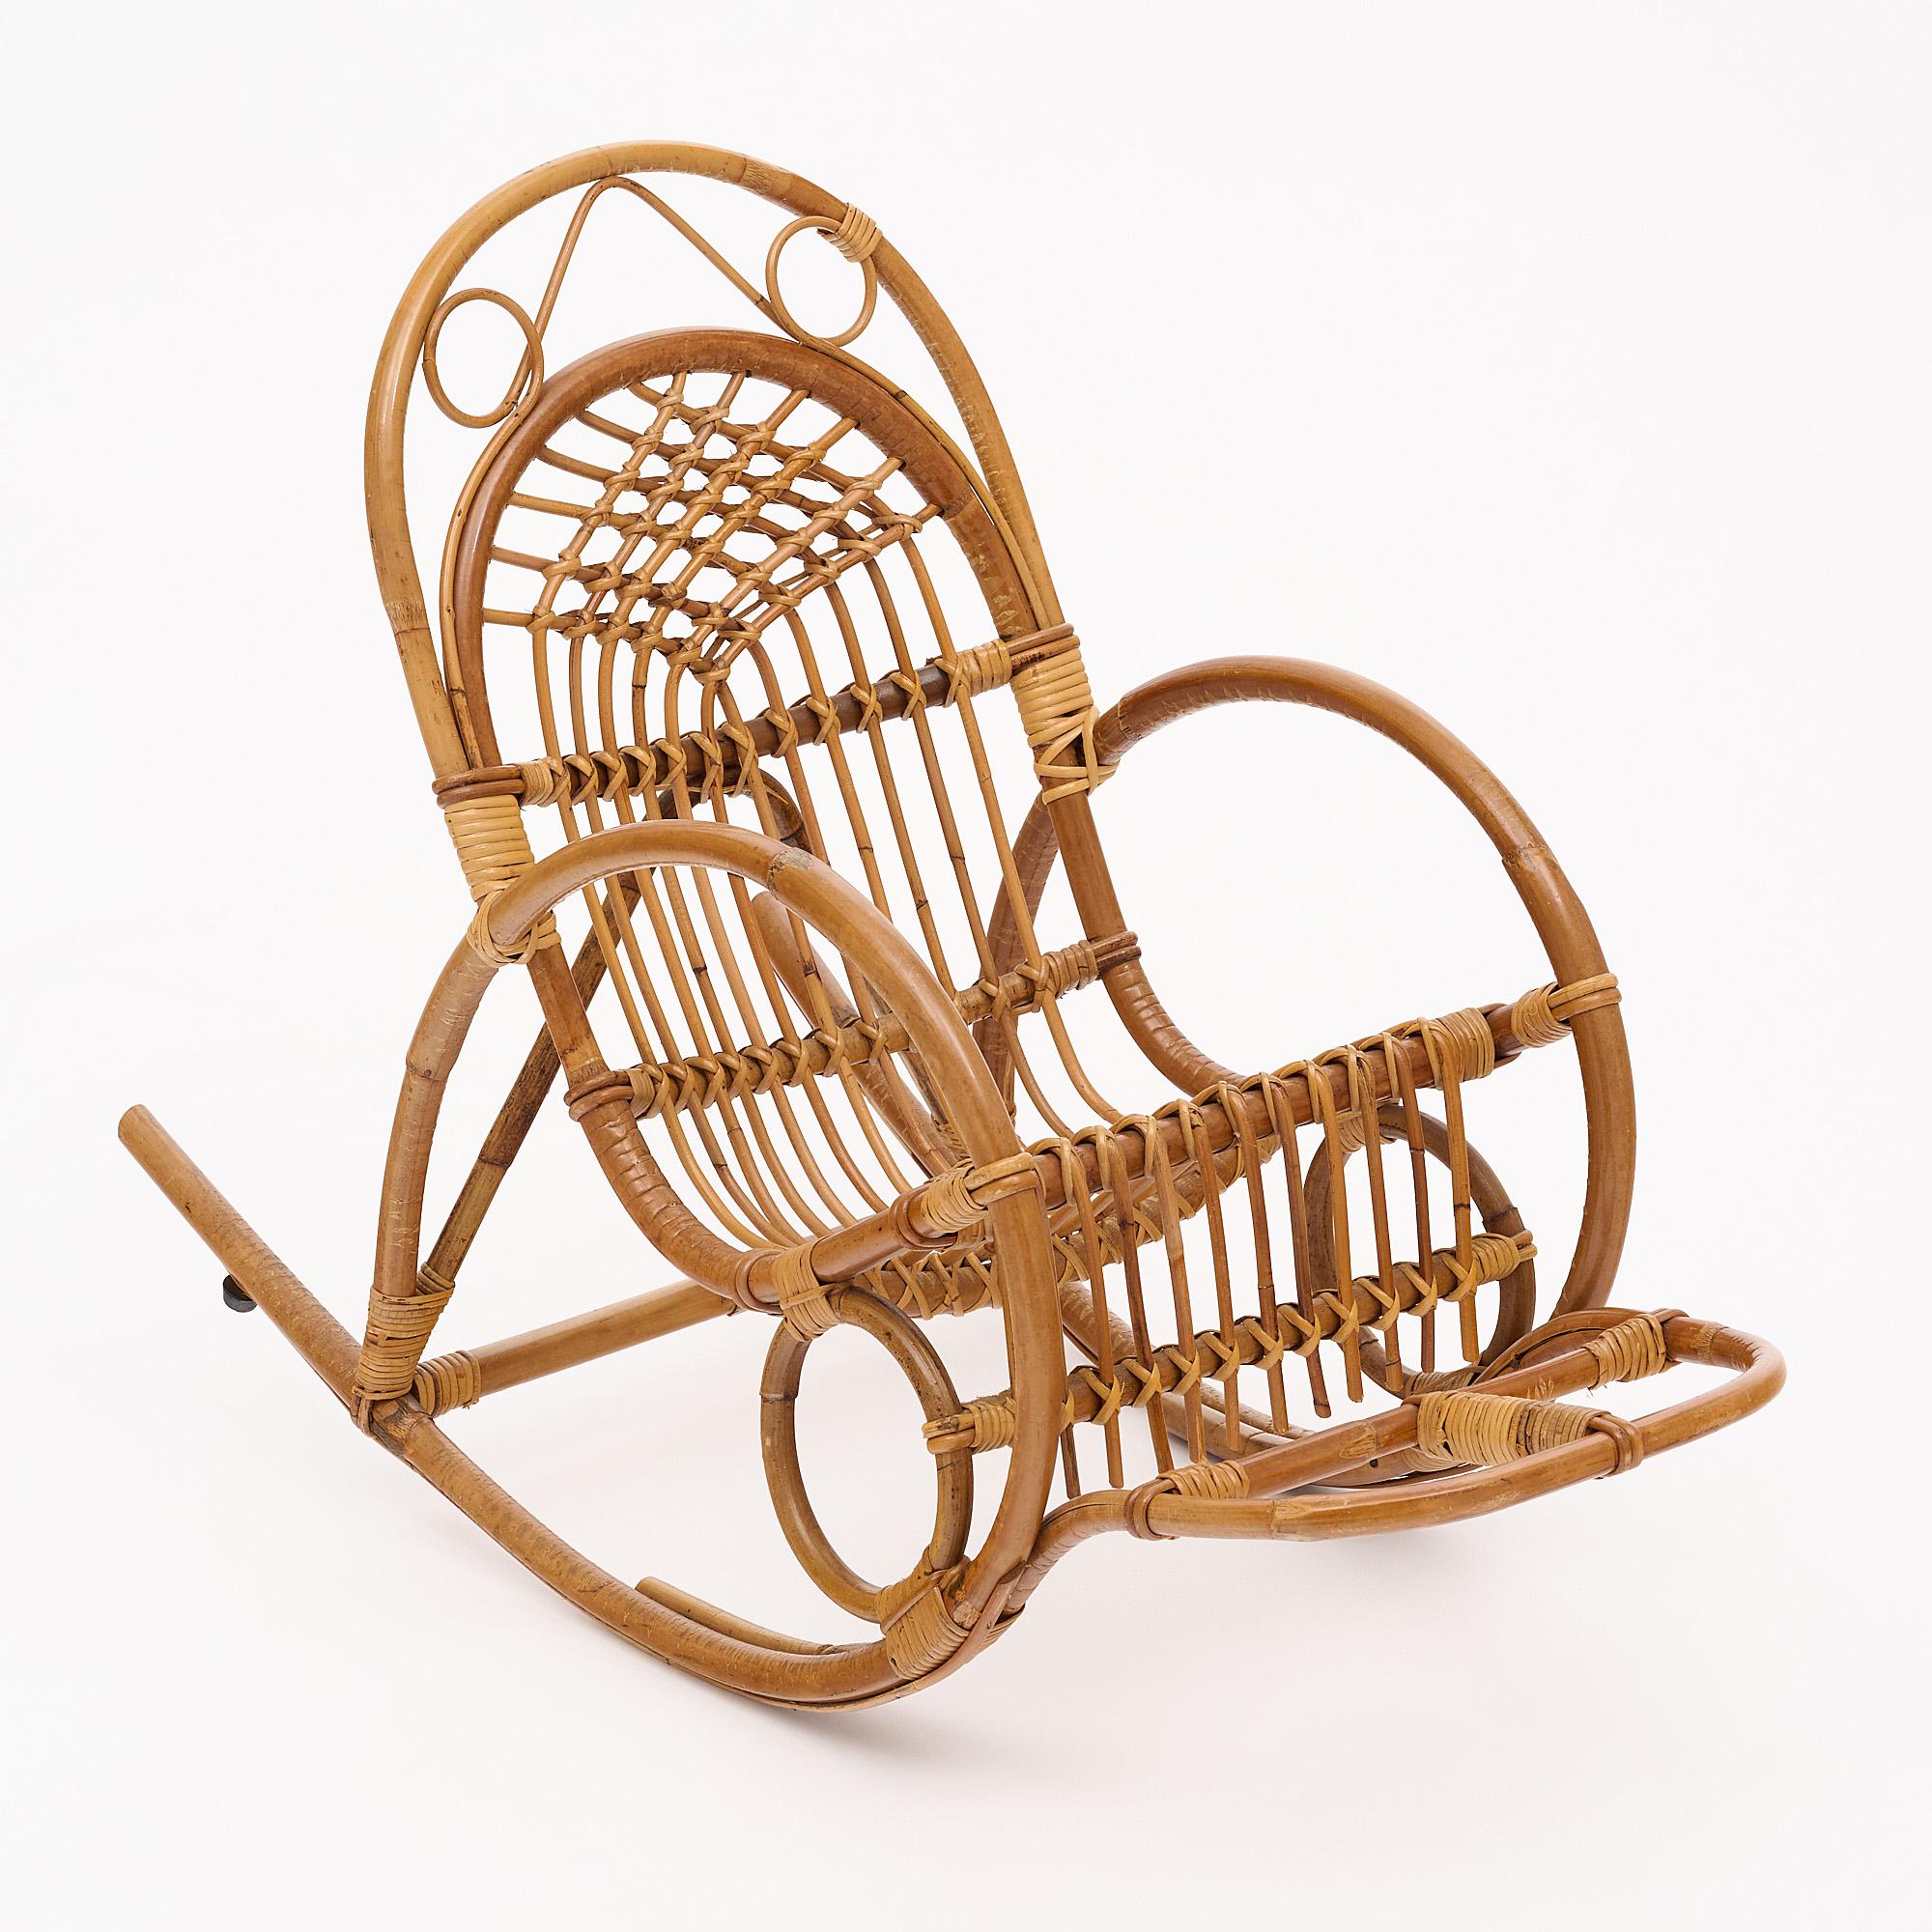 Rattan child’s rocking chair. From the region of Lyon, France. This chic little chair features a foot rest.